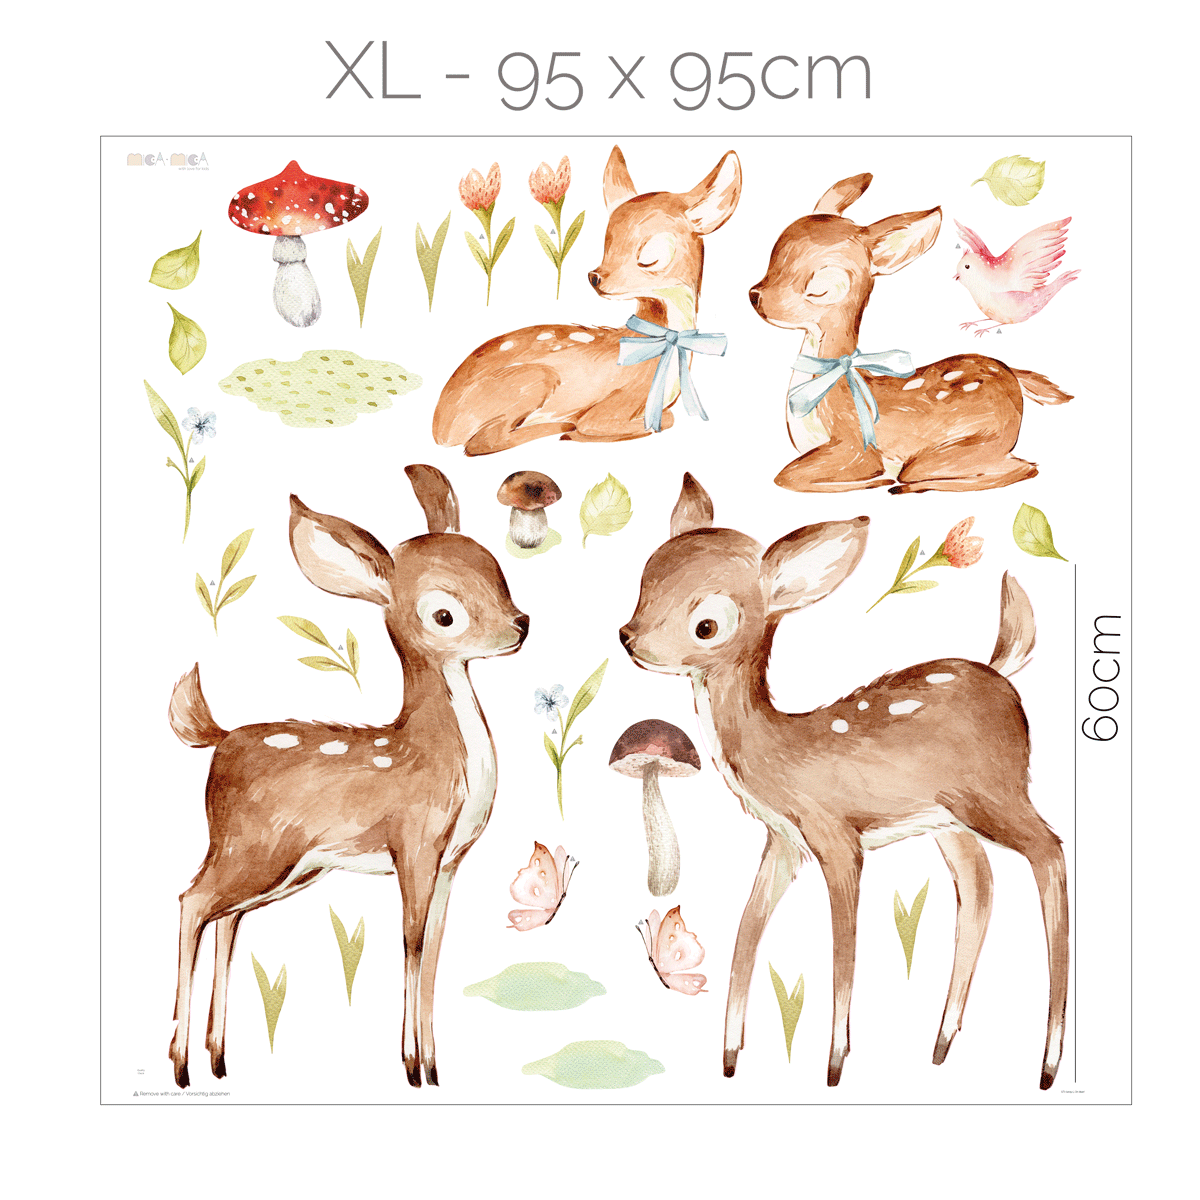 Woodland wall stickers - Oh deer!